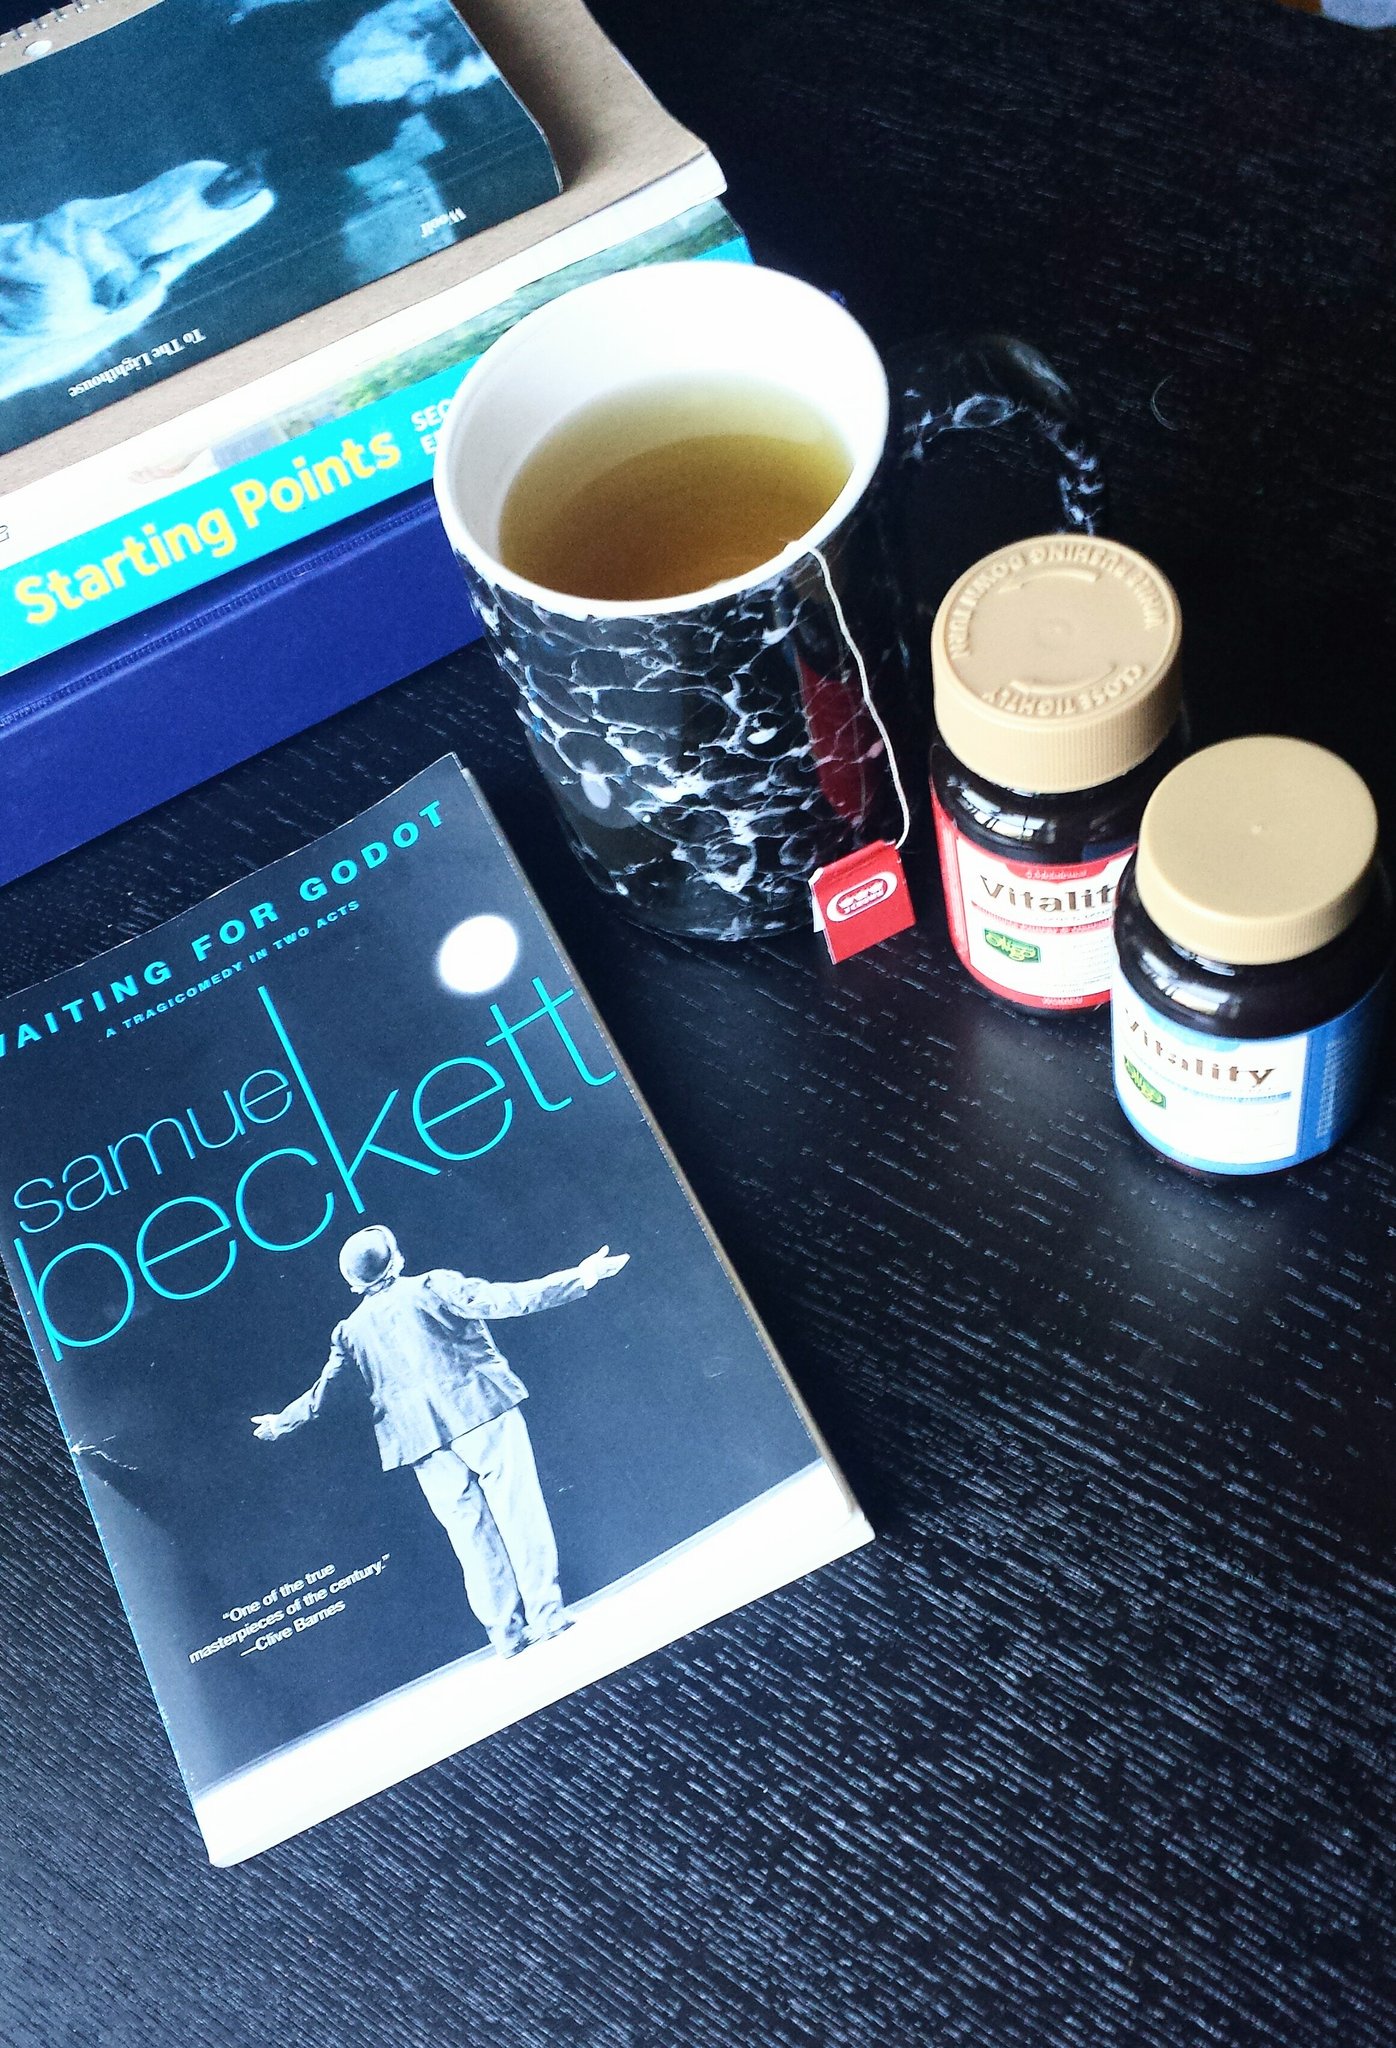 An image of a mug of tea, two containers of multivitamins and the playbook "Waiting for Godot" assorted on a black coffee table.